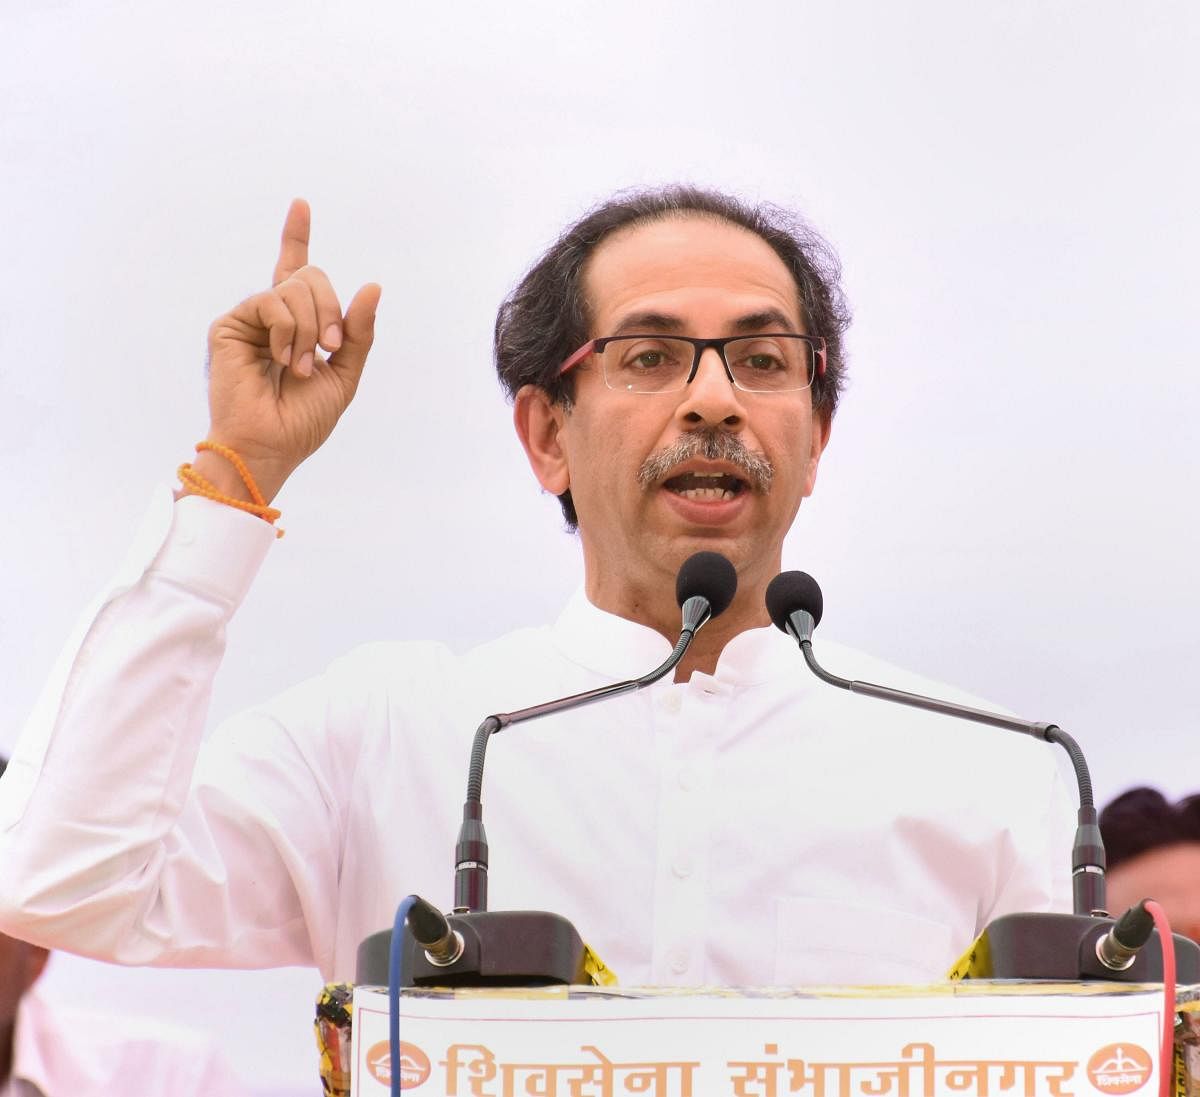 Speaking at a function, Thackeray lavished praise on Modi for nullifying Article 370, and gave a call for construction of grand Ram temple in Ayodhya and introduction of Uniform Civil Code (PTI File Photo)